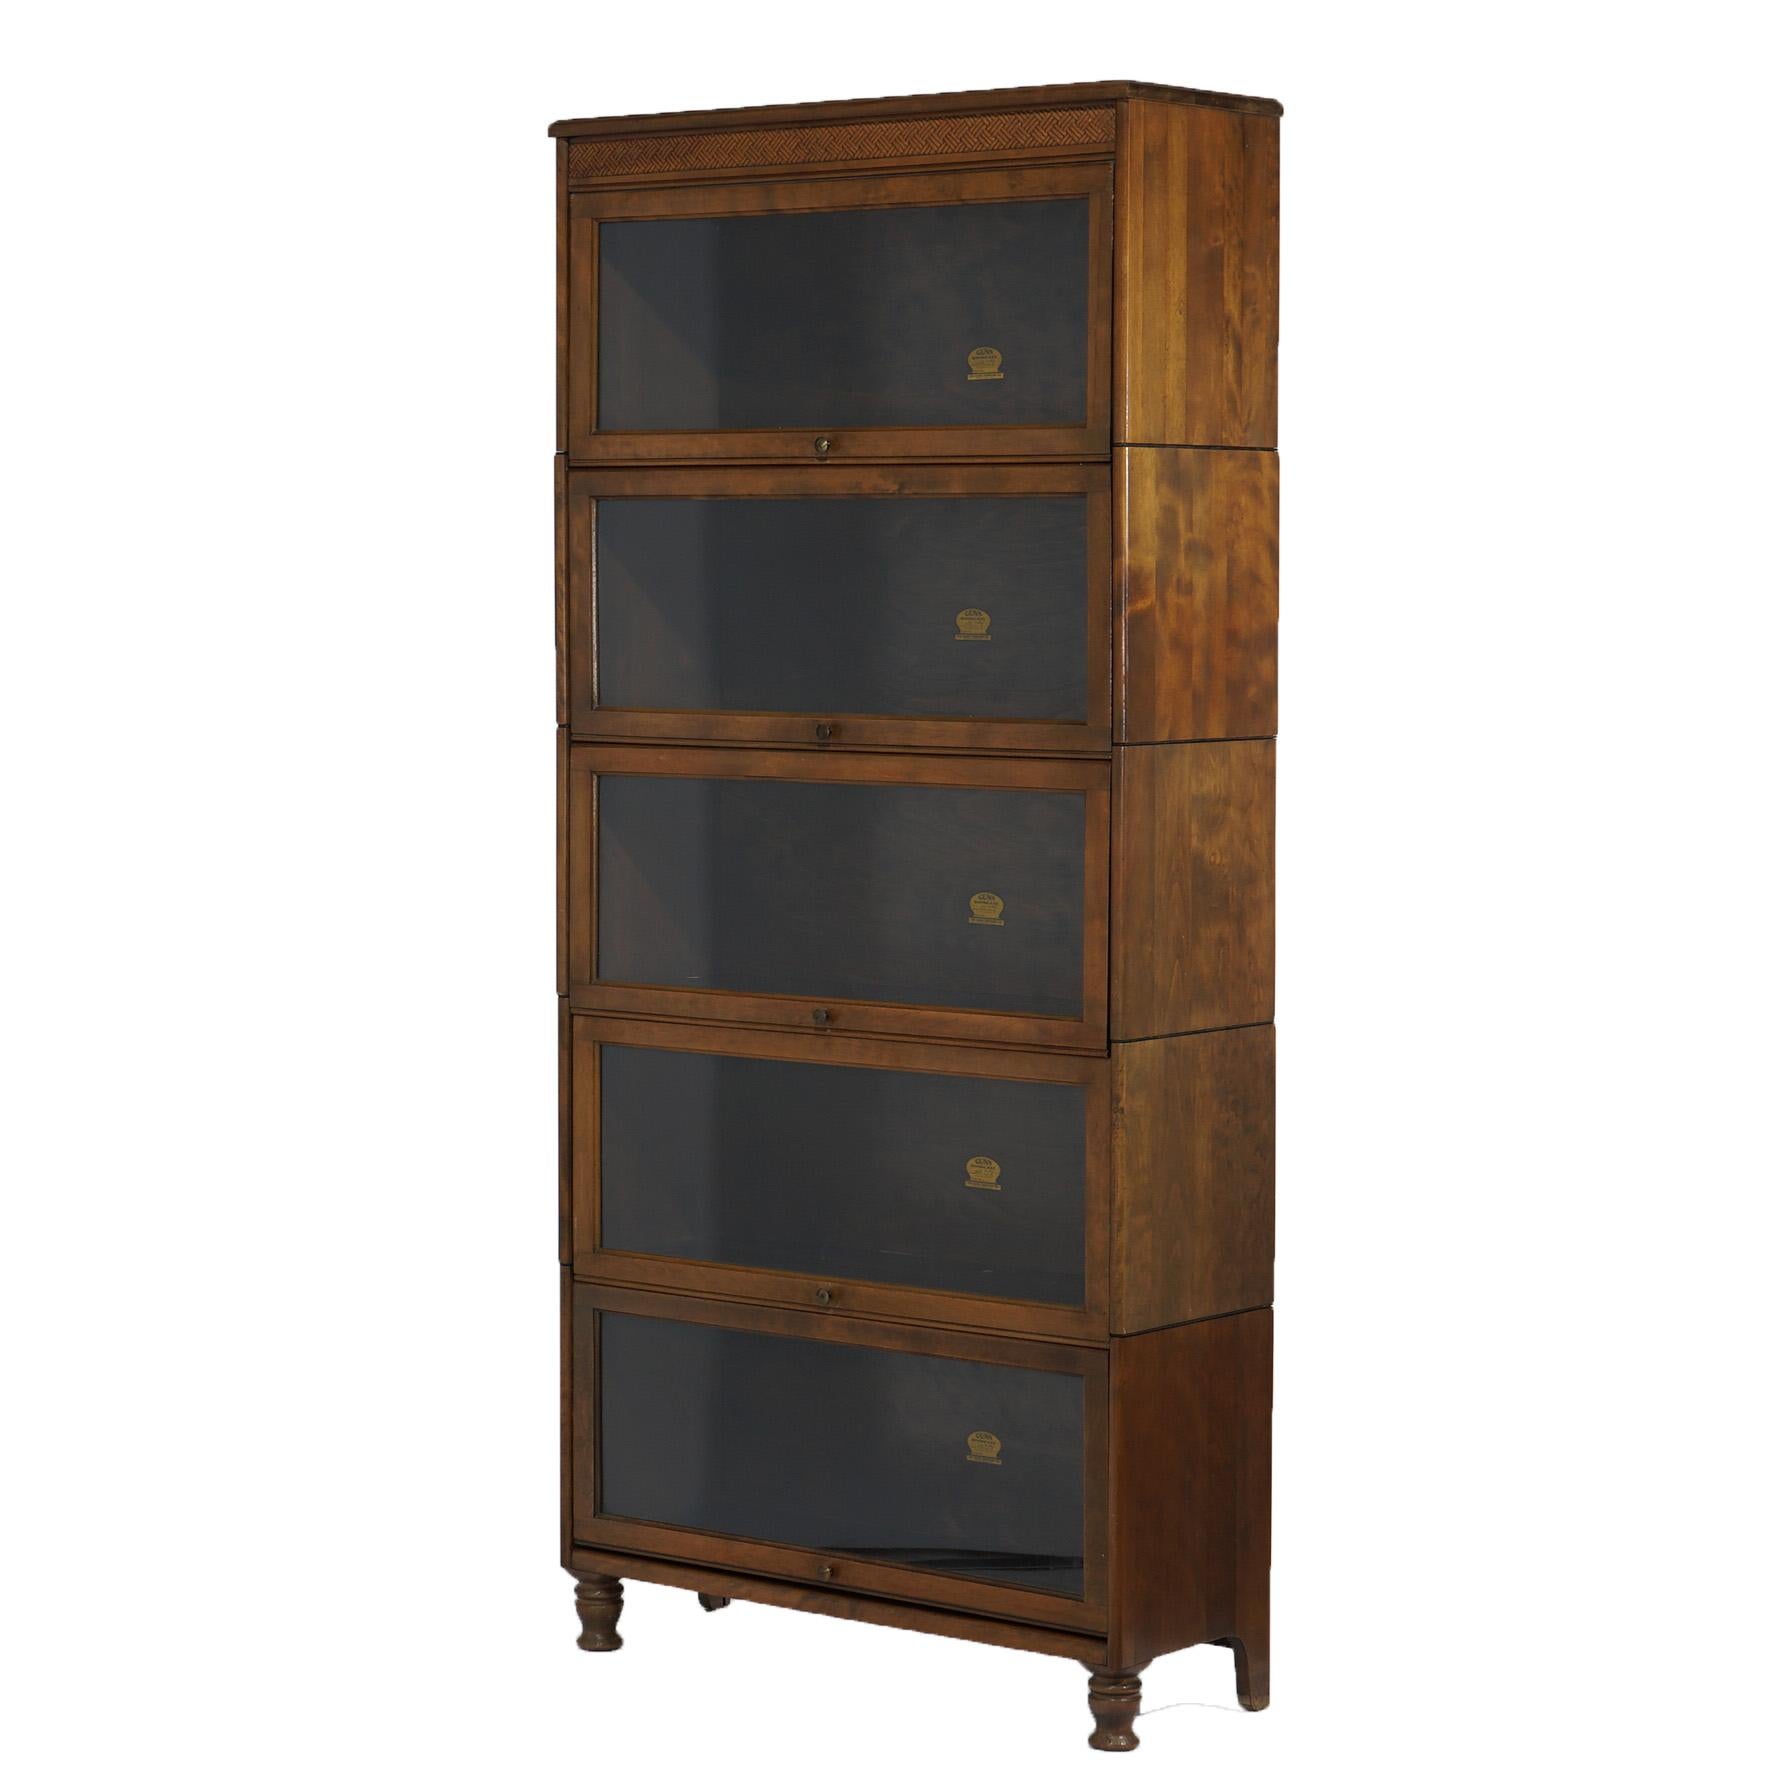 ***Ask About Reduced In-House Shipping Rates - Reliable Service & Fully Insured***
An antique Arts and Crafts barrister bookcase by Gunn offers cherry construction with five stacks, each having pullout glass doors, raised on straight legs and maker